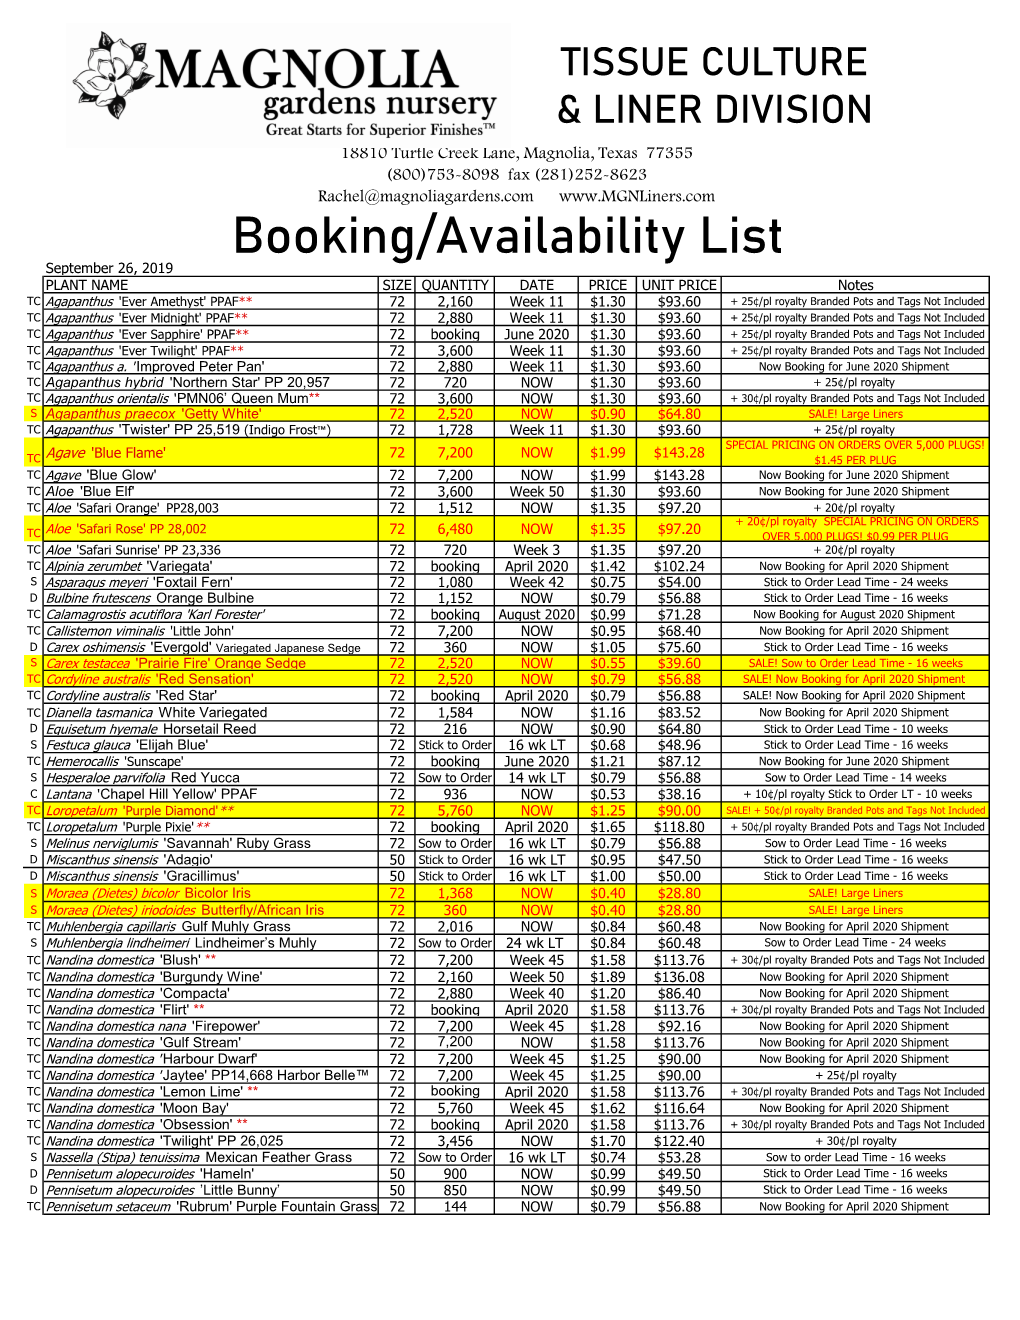 Booking/Availability List